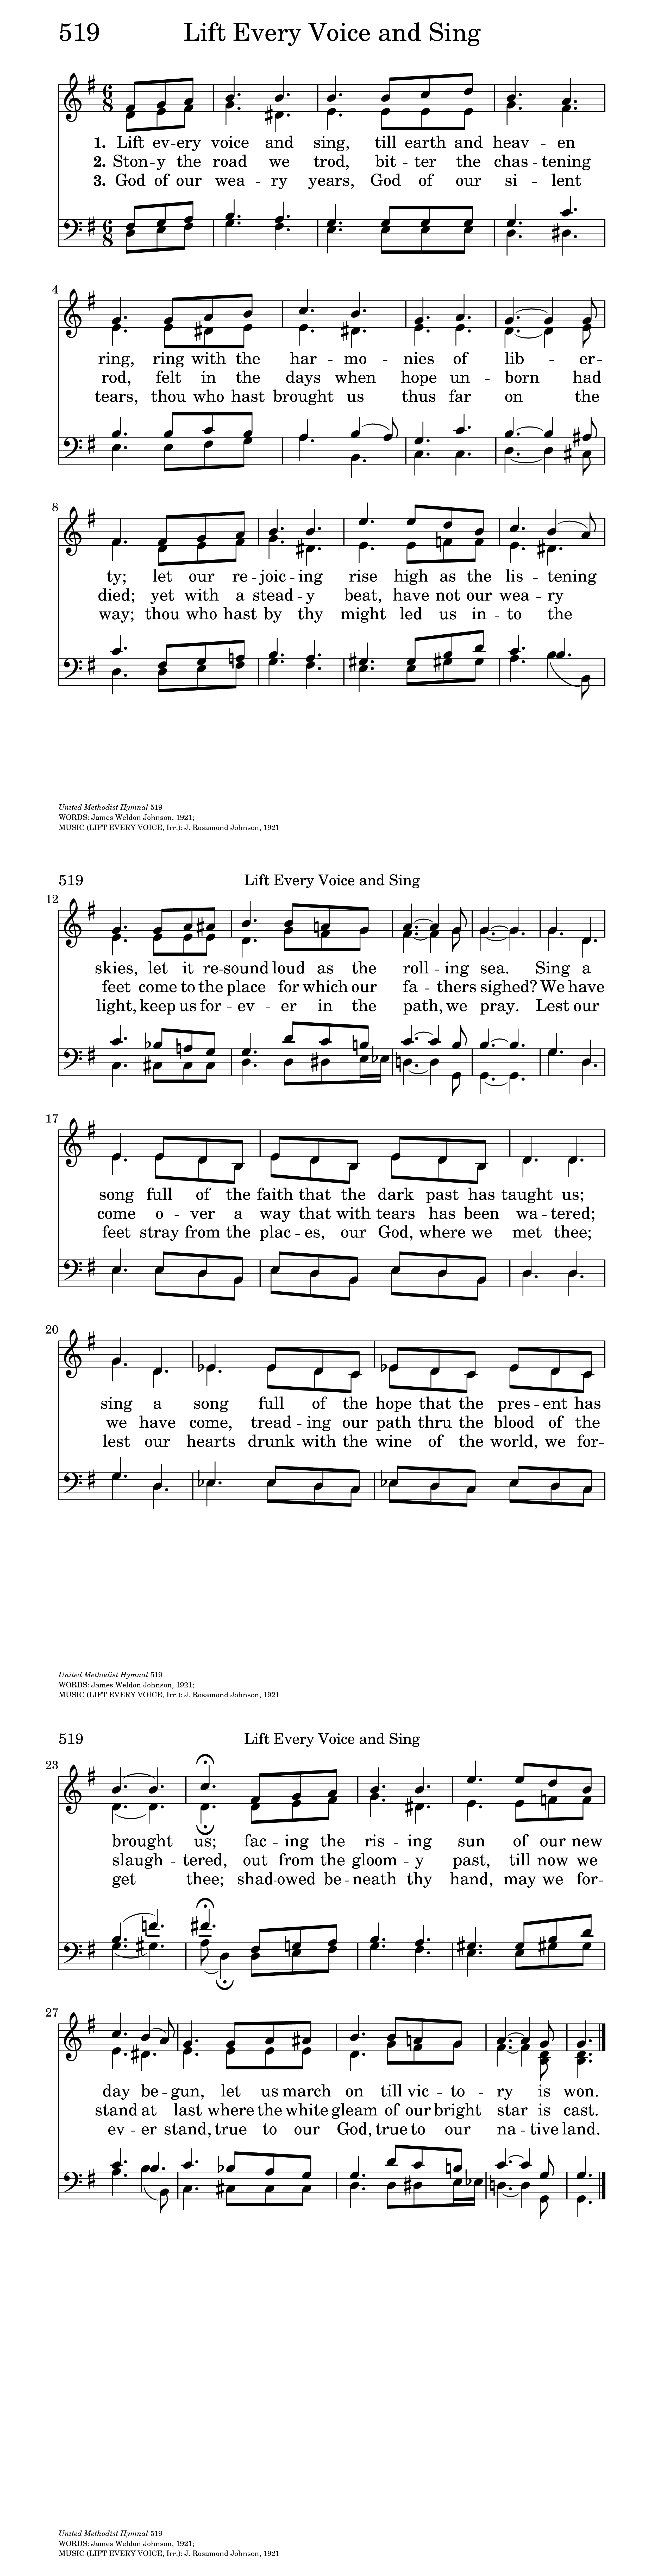 The United Methodist Hymnal 519. Lift every voice and sing | Hymnary.org